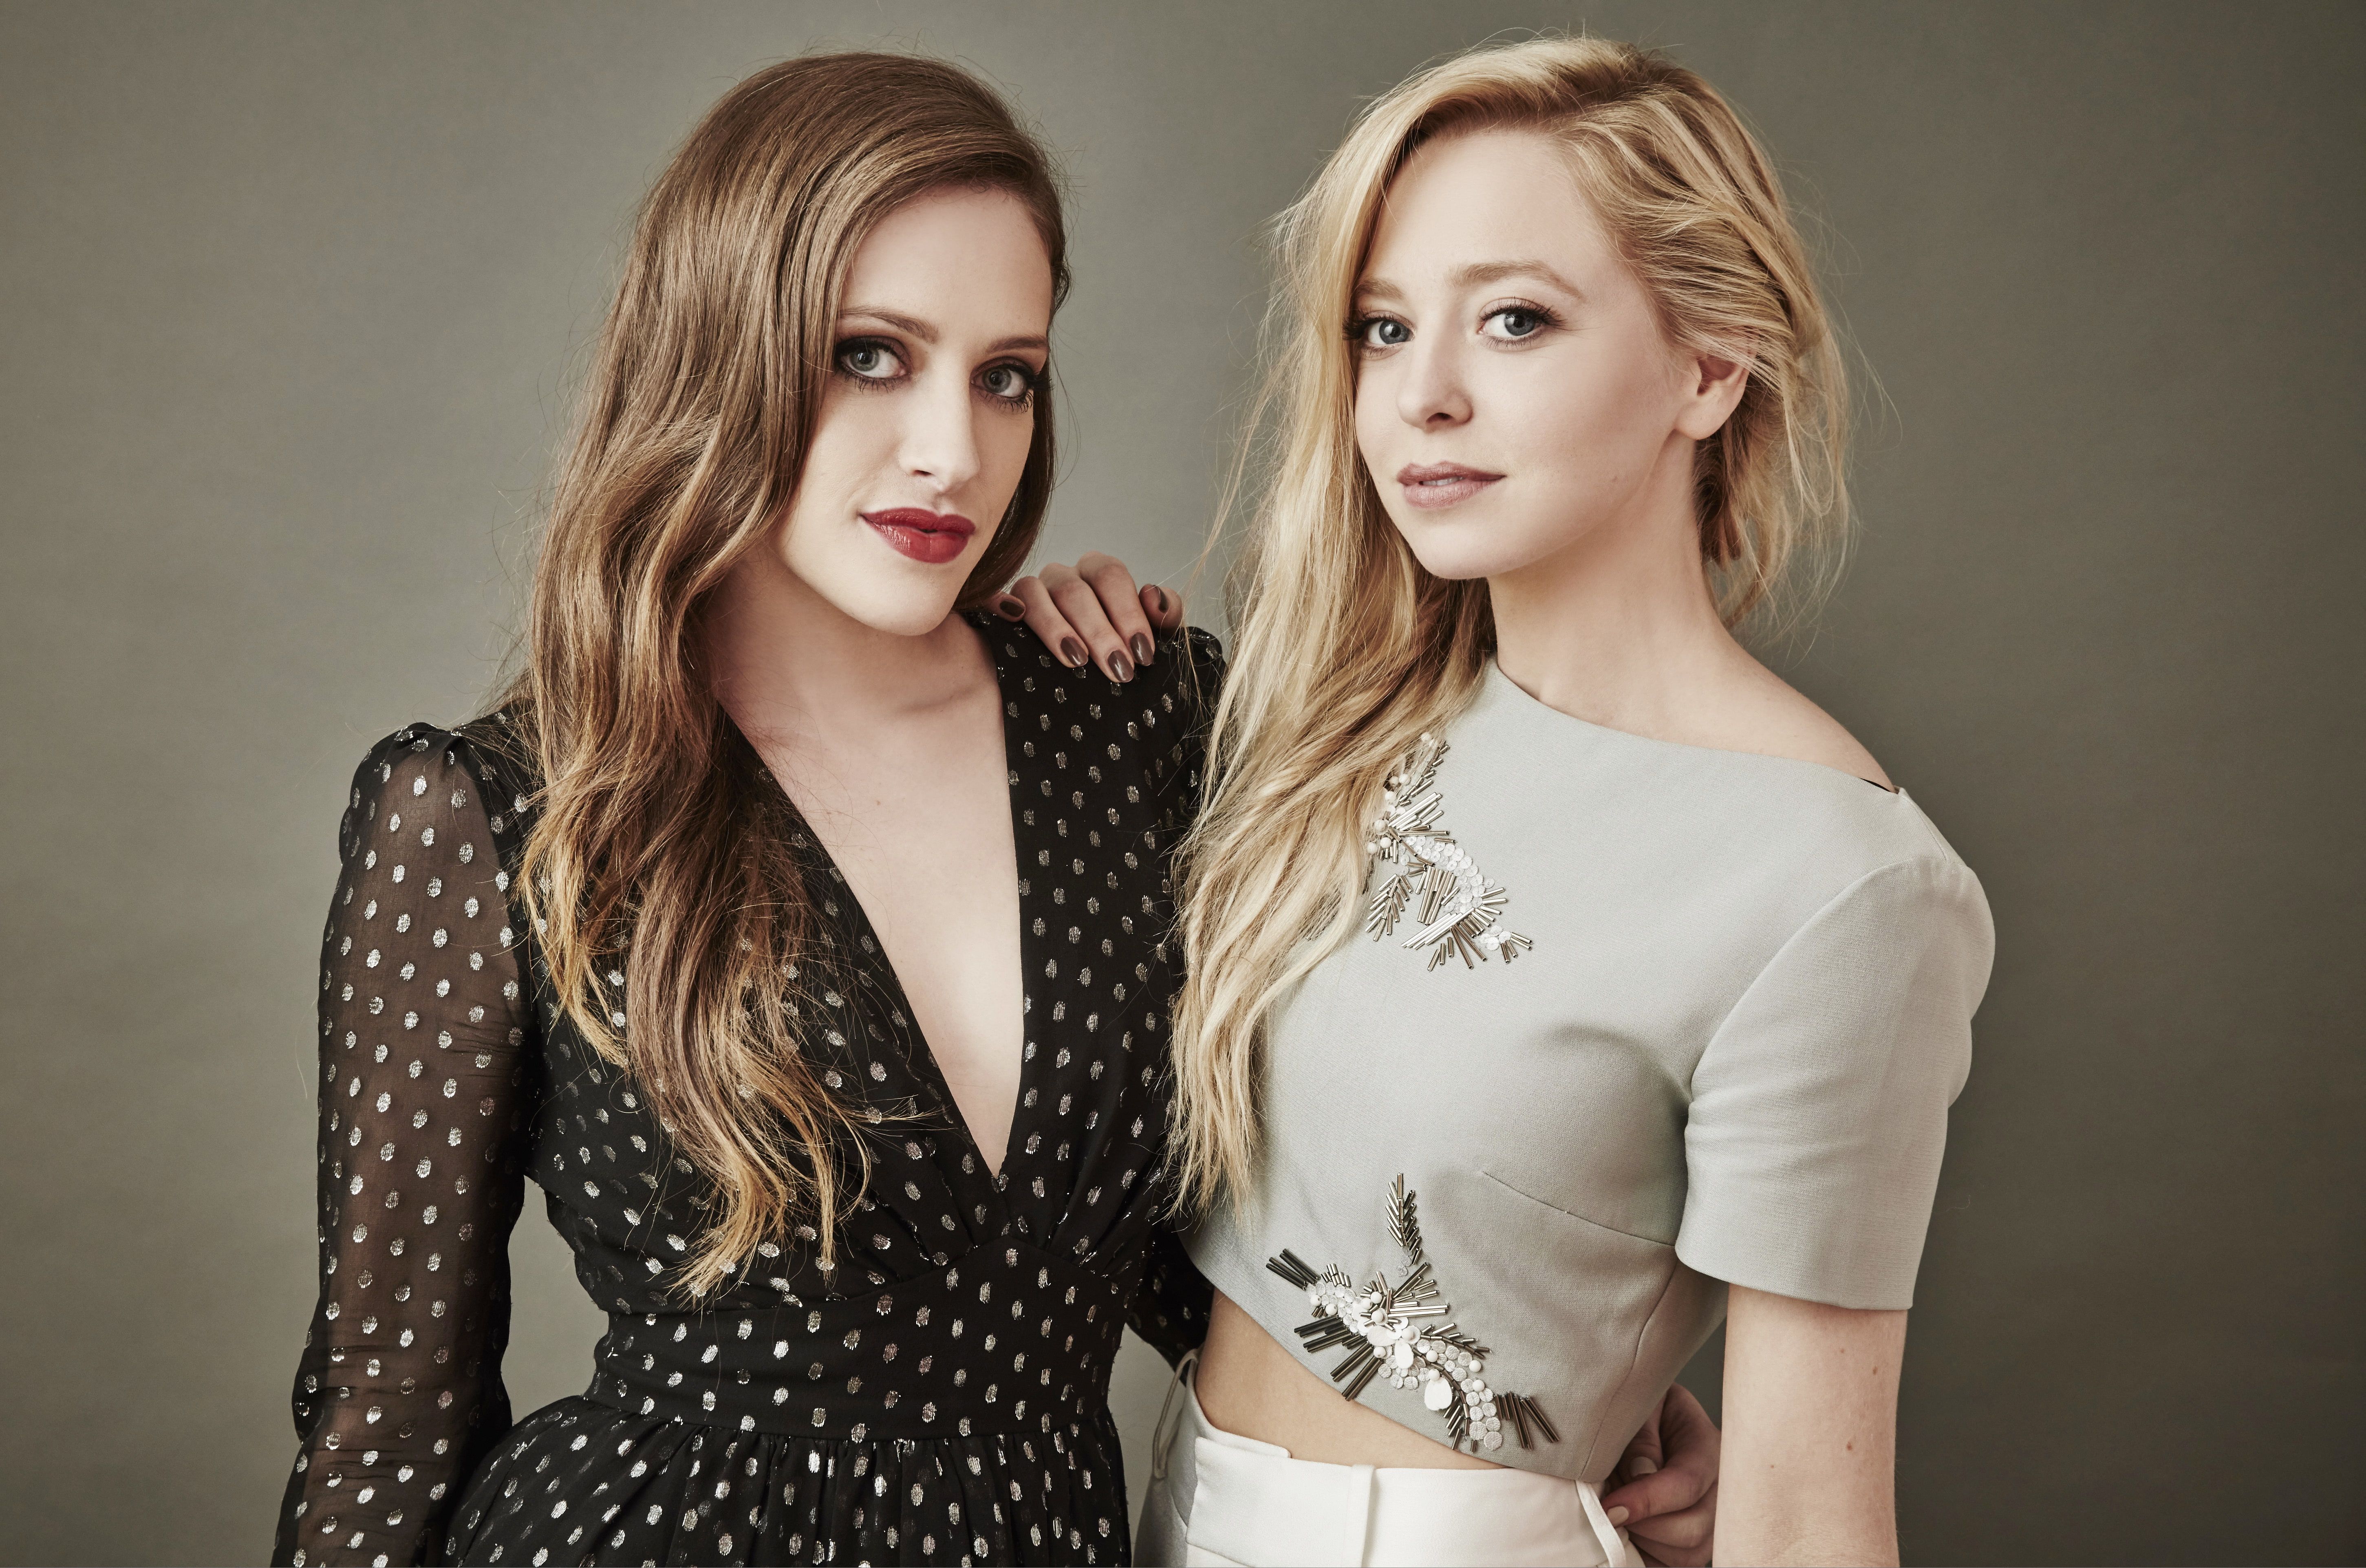 Carly Chaikin And Portia Doubleday Mr. Robot Actress Wallpapers